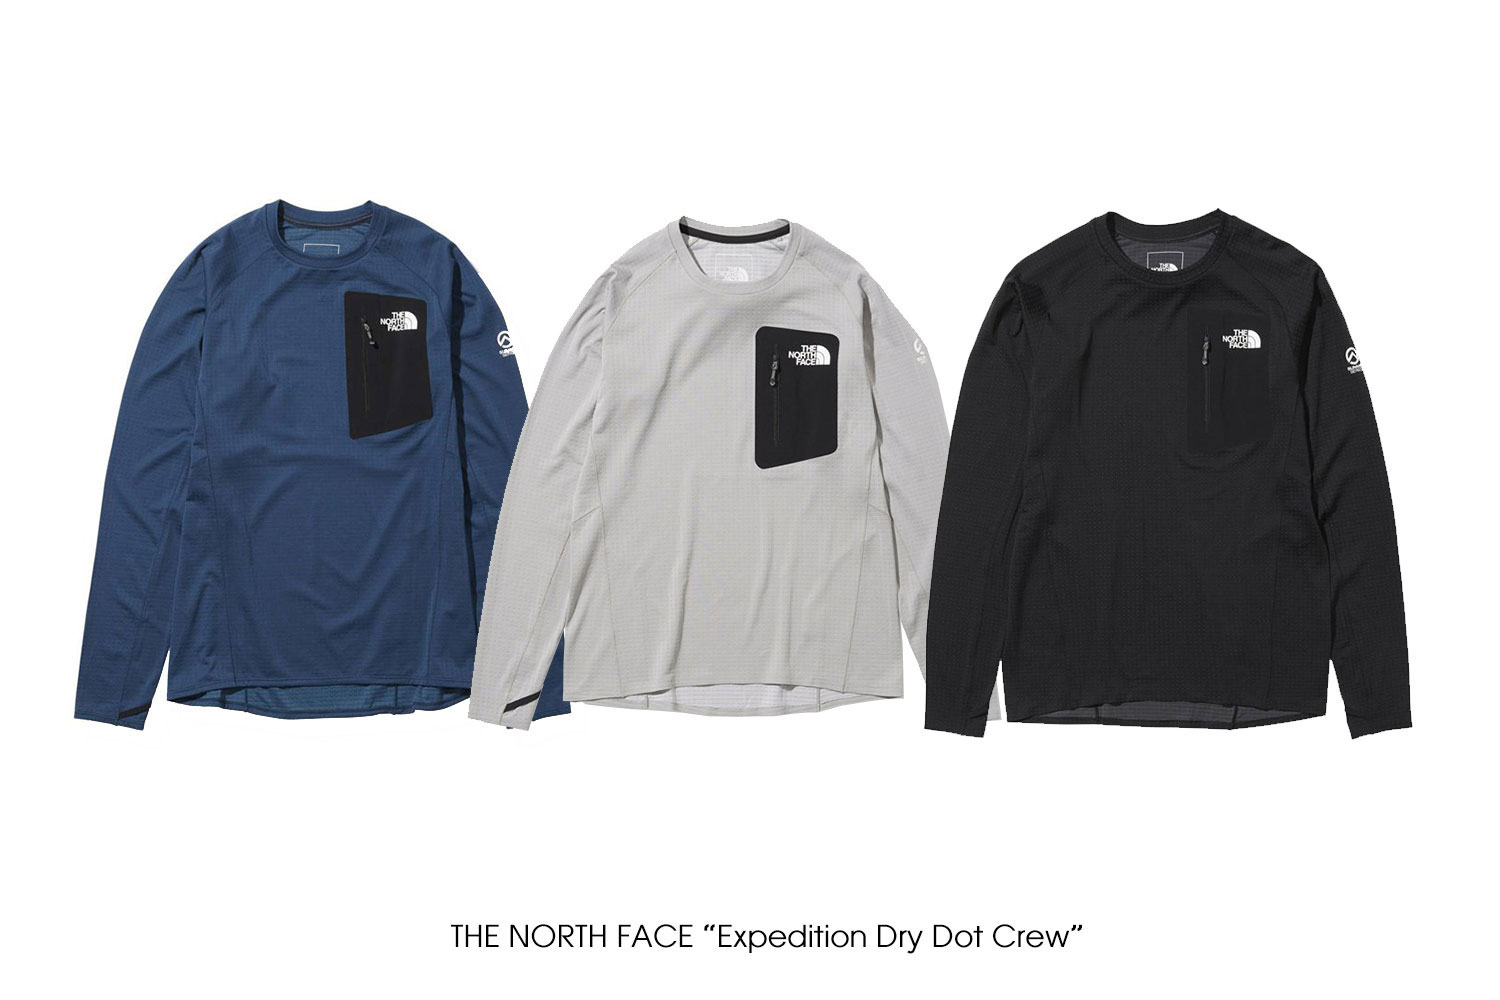 THE NORTH FACE “Expedition Dry Dot Crew” | PORTAL(ポータル)